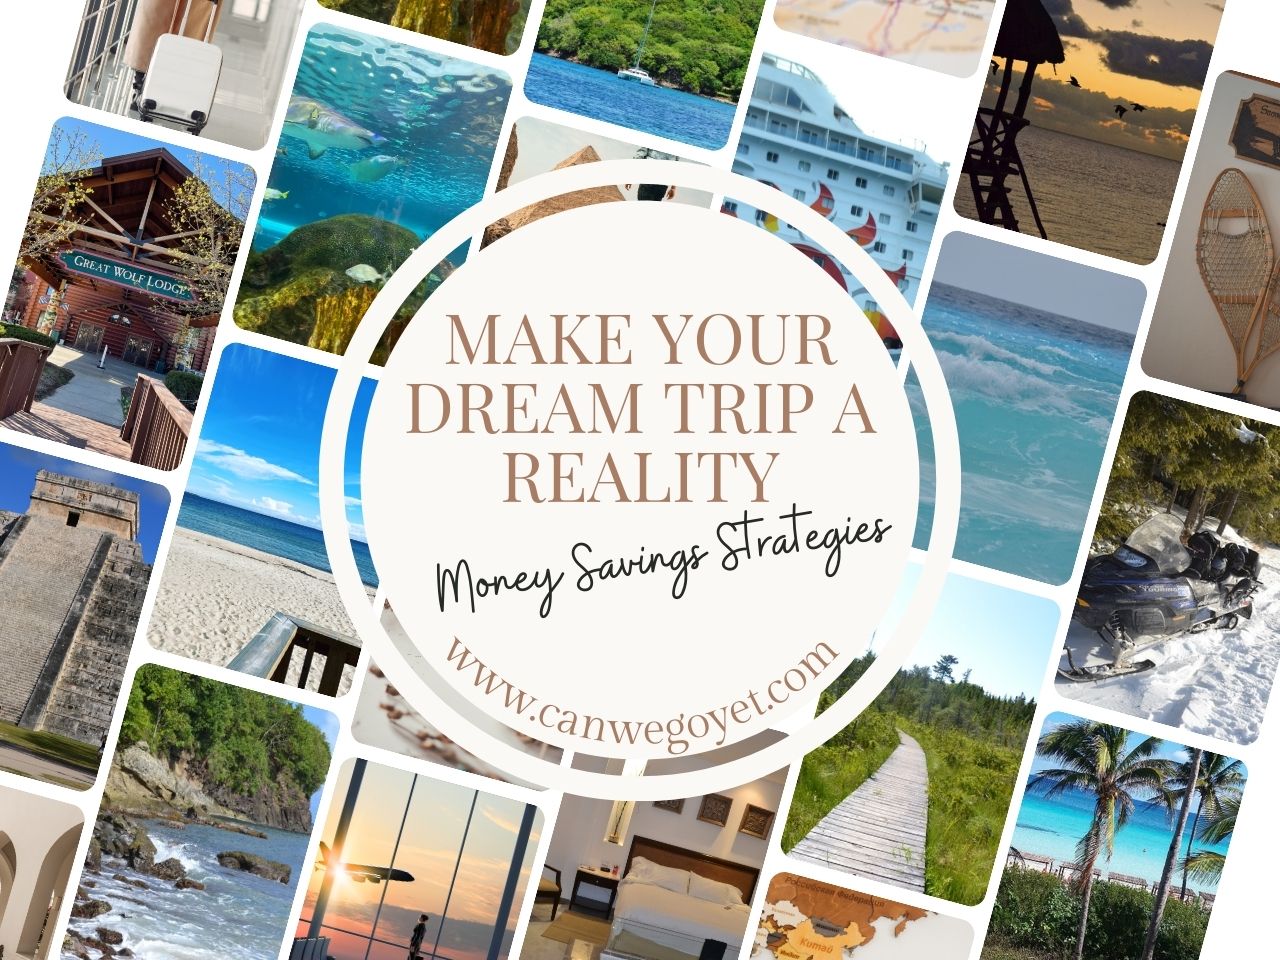 Make your dream trip a reality. Money savings strategies. Photos of different travel destinations.